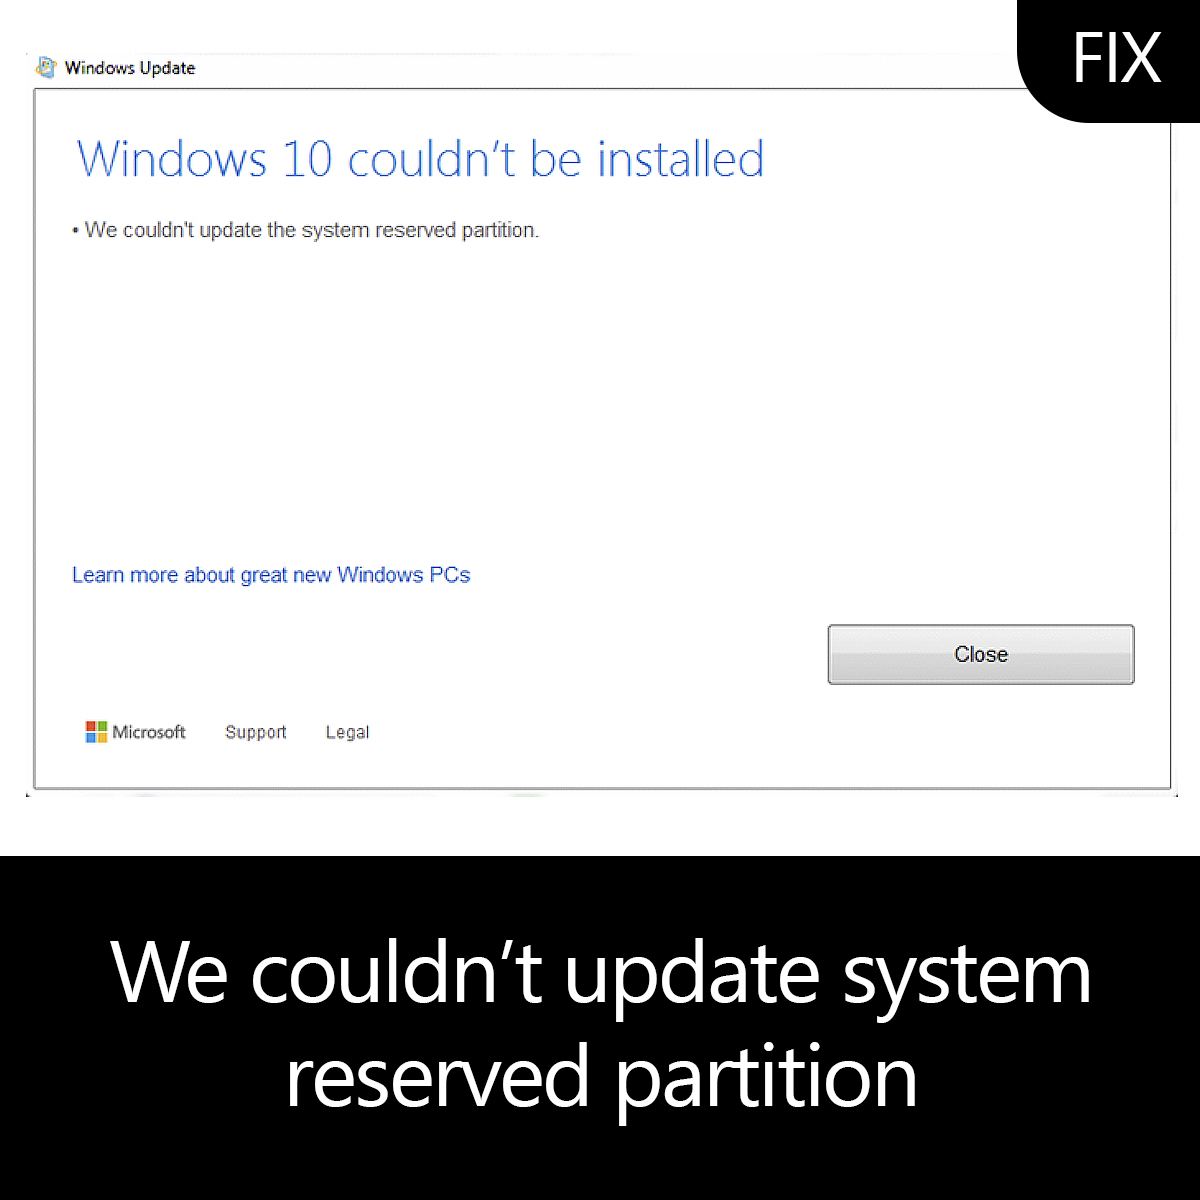 windows 10 update reserved partition